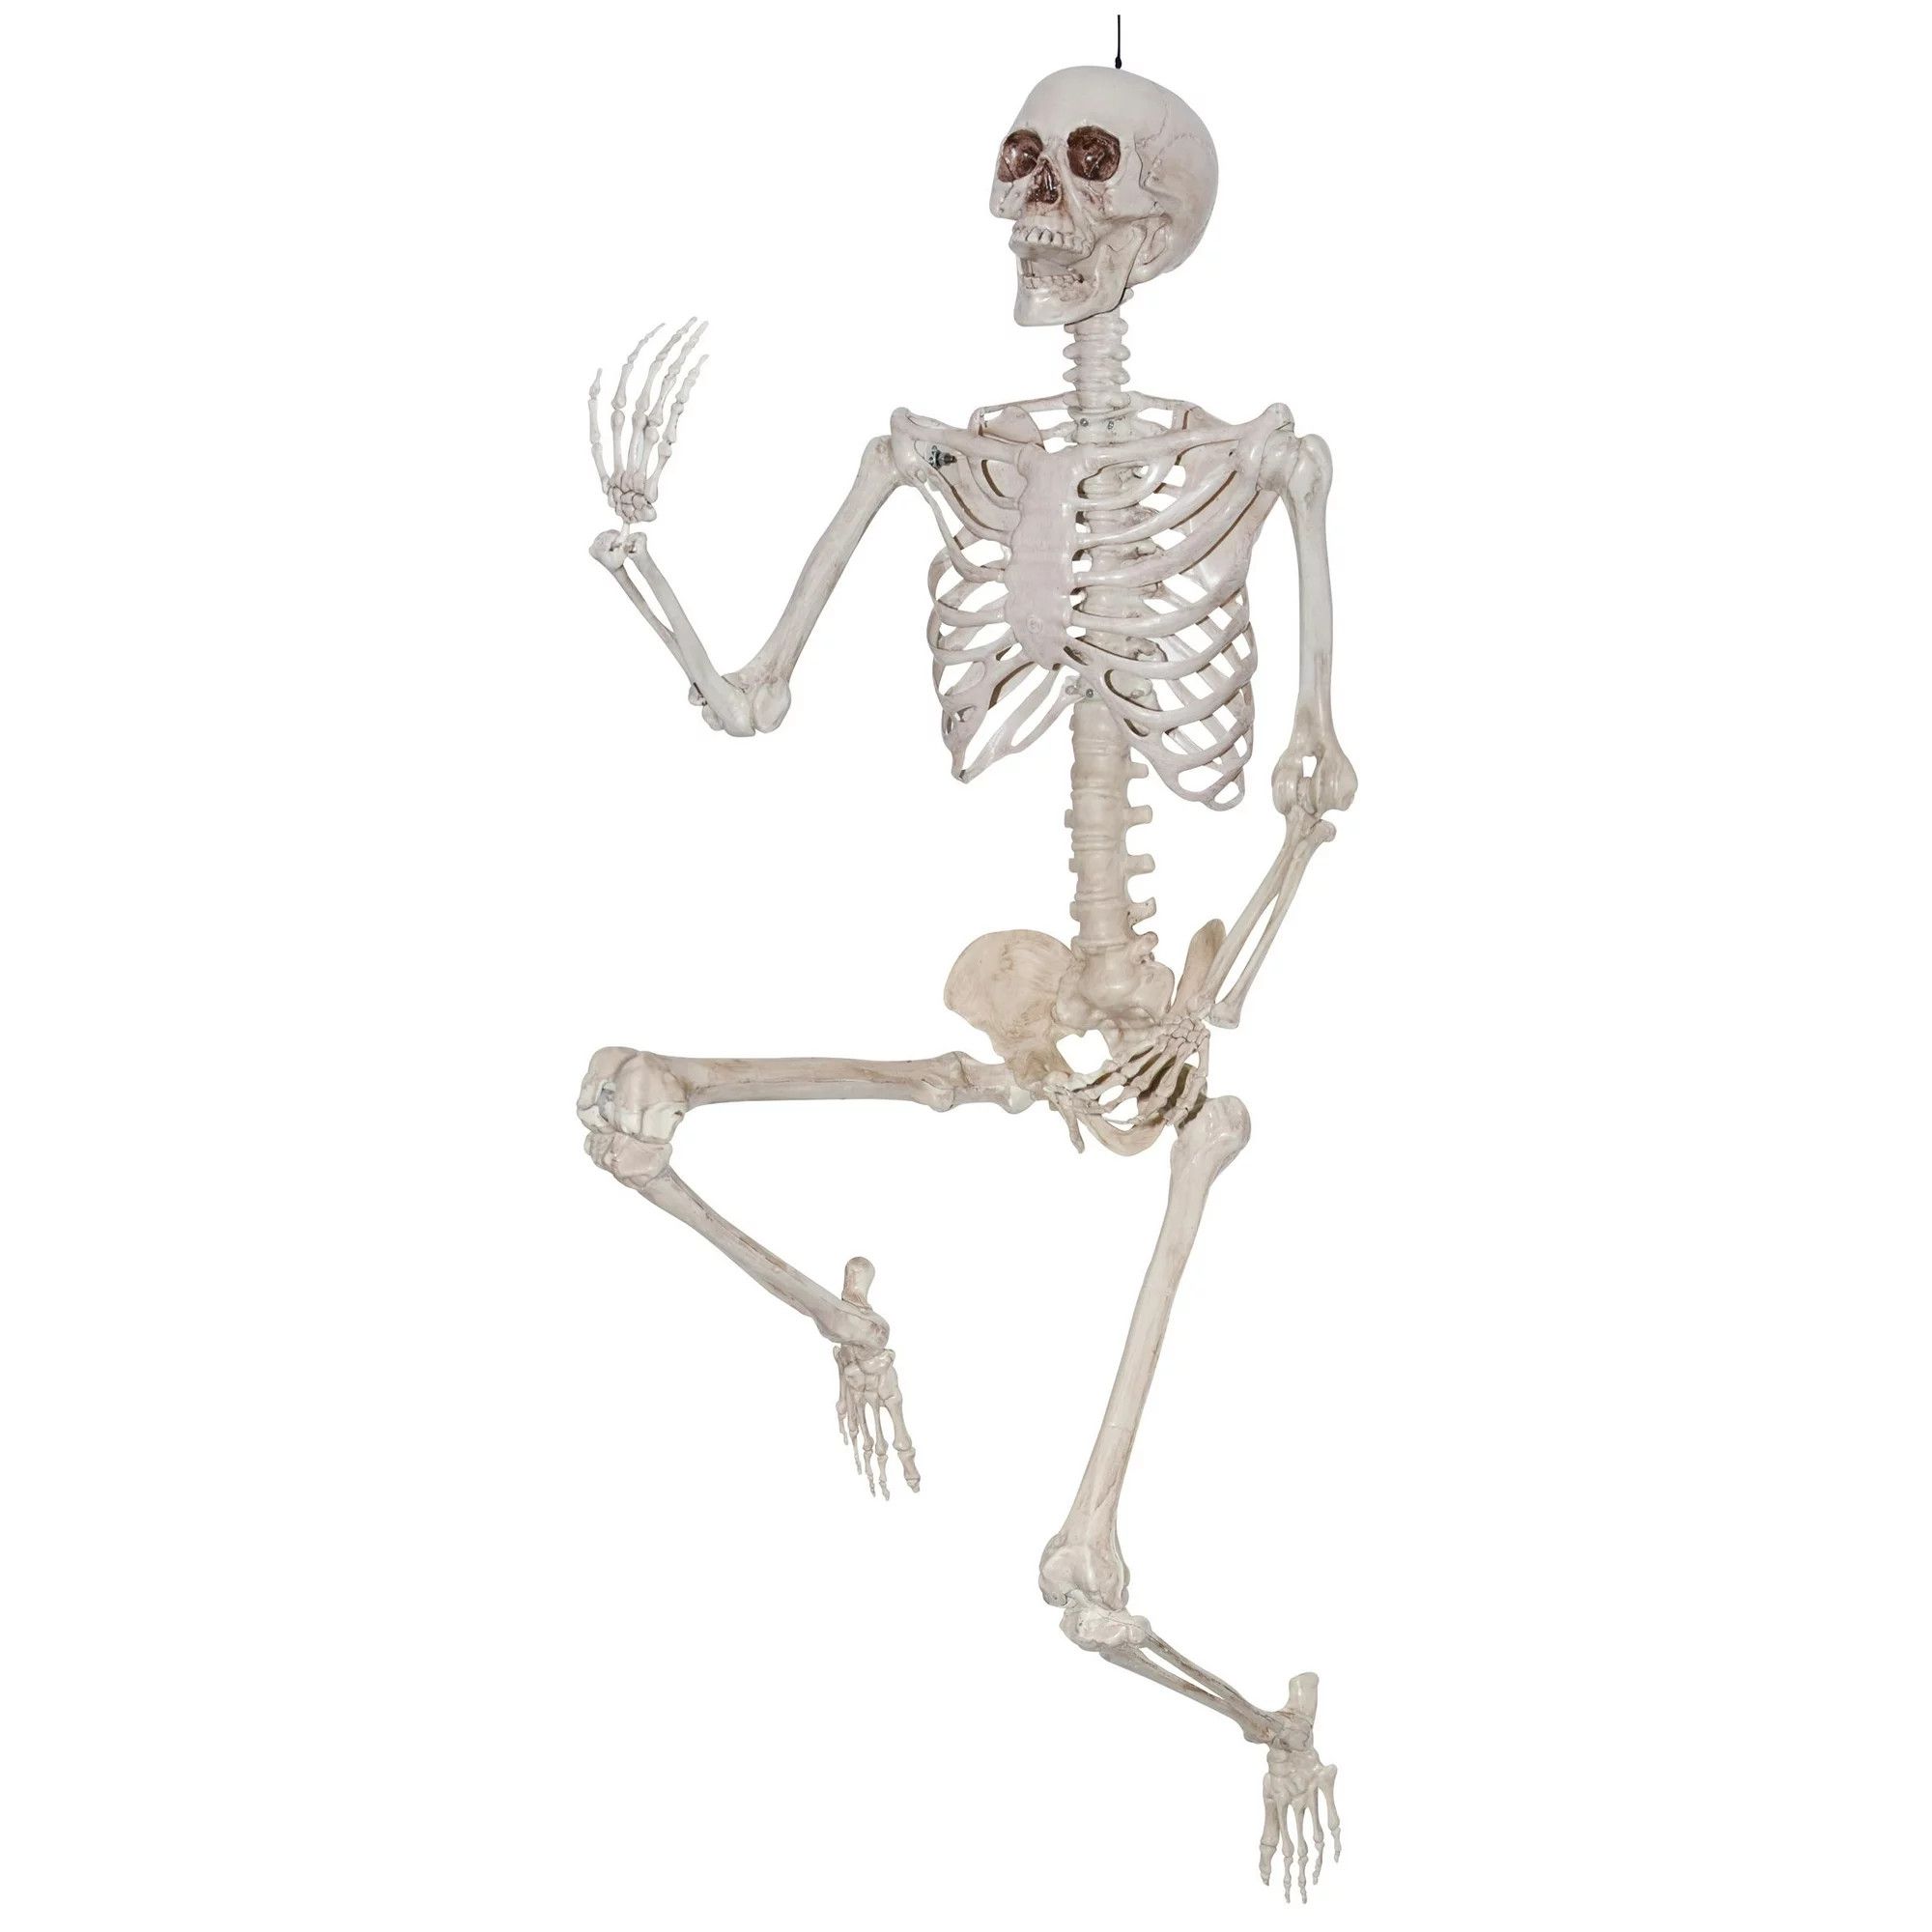 Halloween Plastic Posable Human Skeleton Decoration, Bone Color, 5FT, 3.5lbs, by Way To Celebrate | Walmart (US)